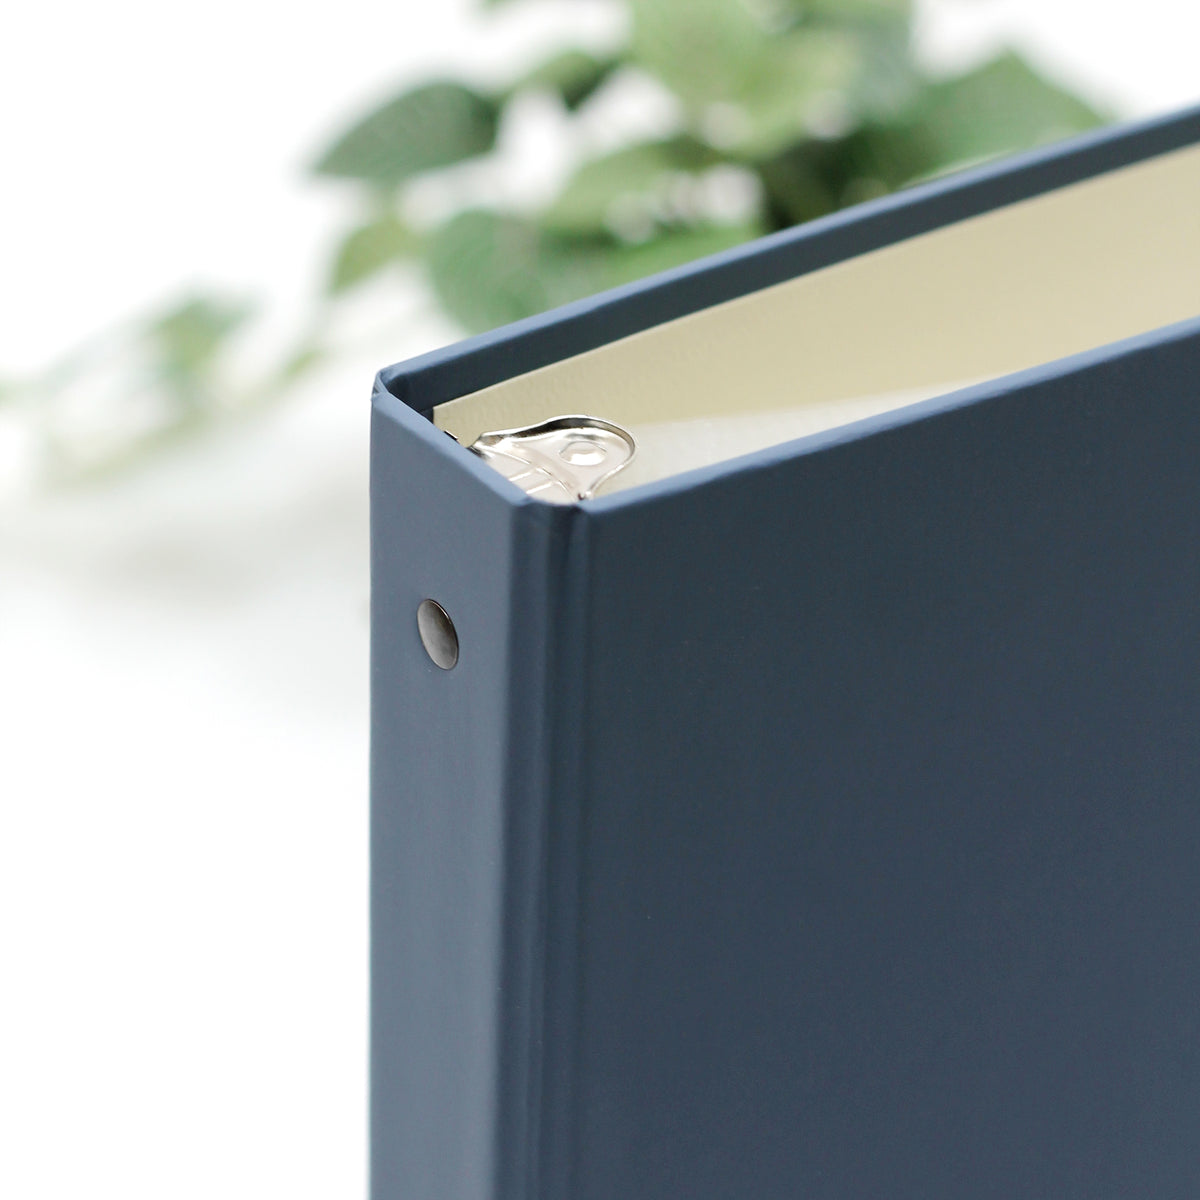 Storage Binder for Photos or Documents with Ocean Blue Vegan Leather Cover